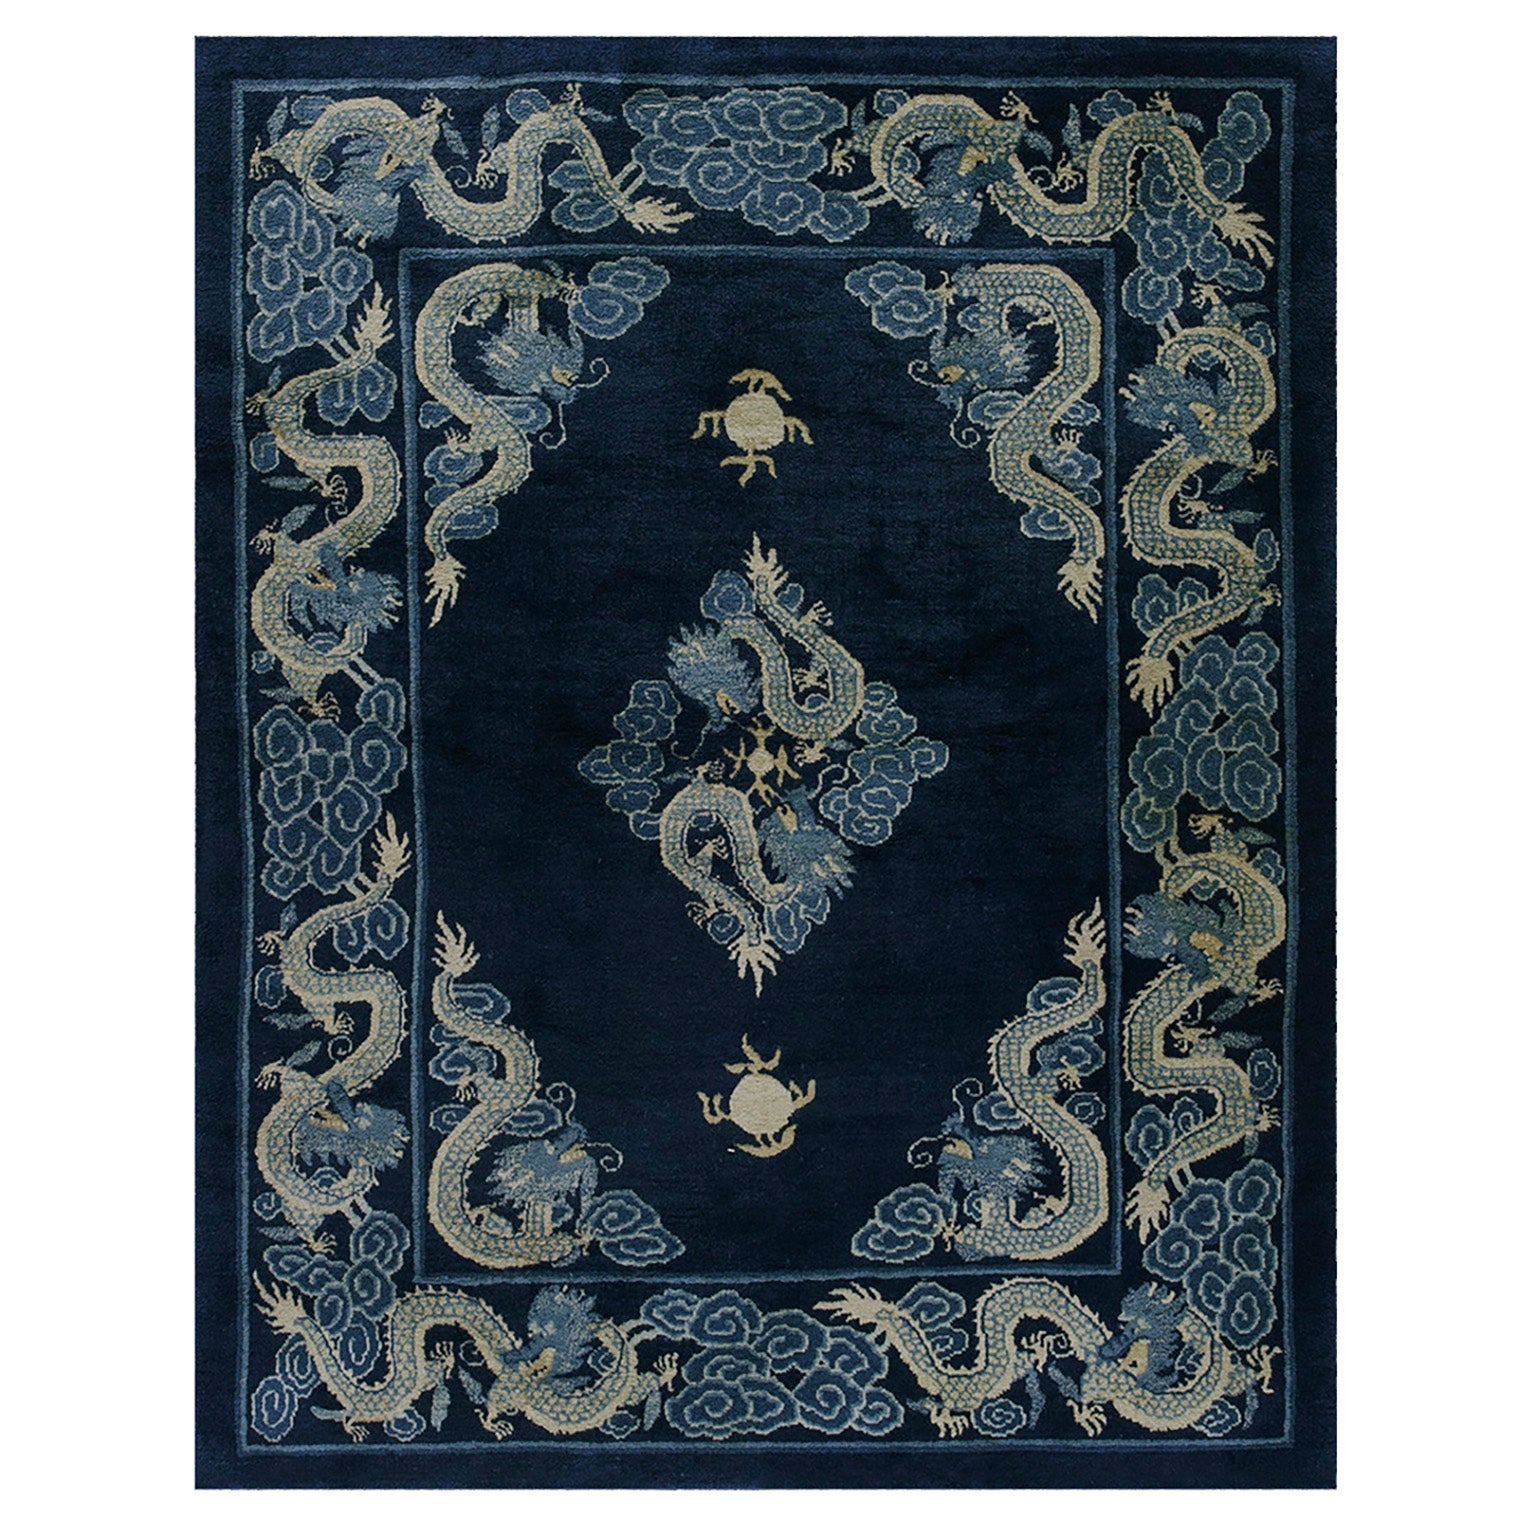 Early 20th Century Chinese Peking Dragon Carpet ( 4'8" x 5'10" - 142 x 178 ) For Sale